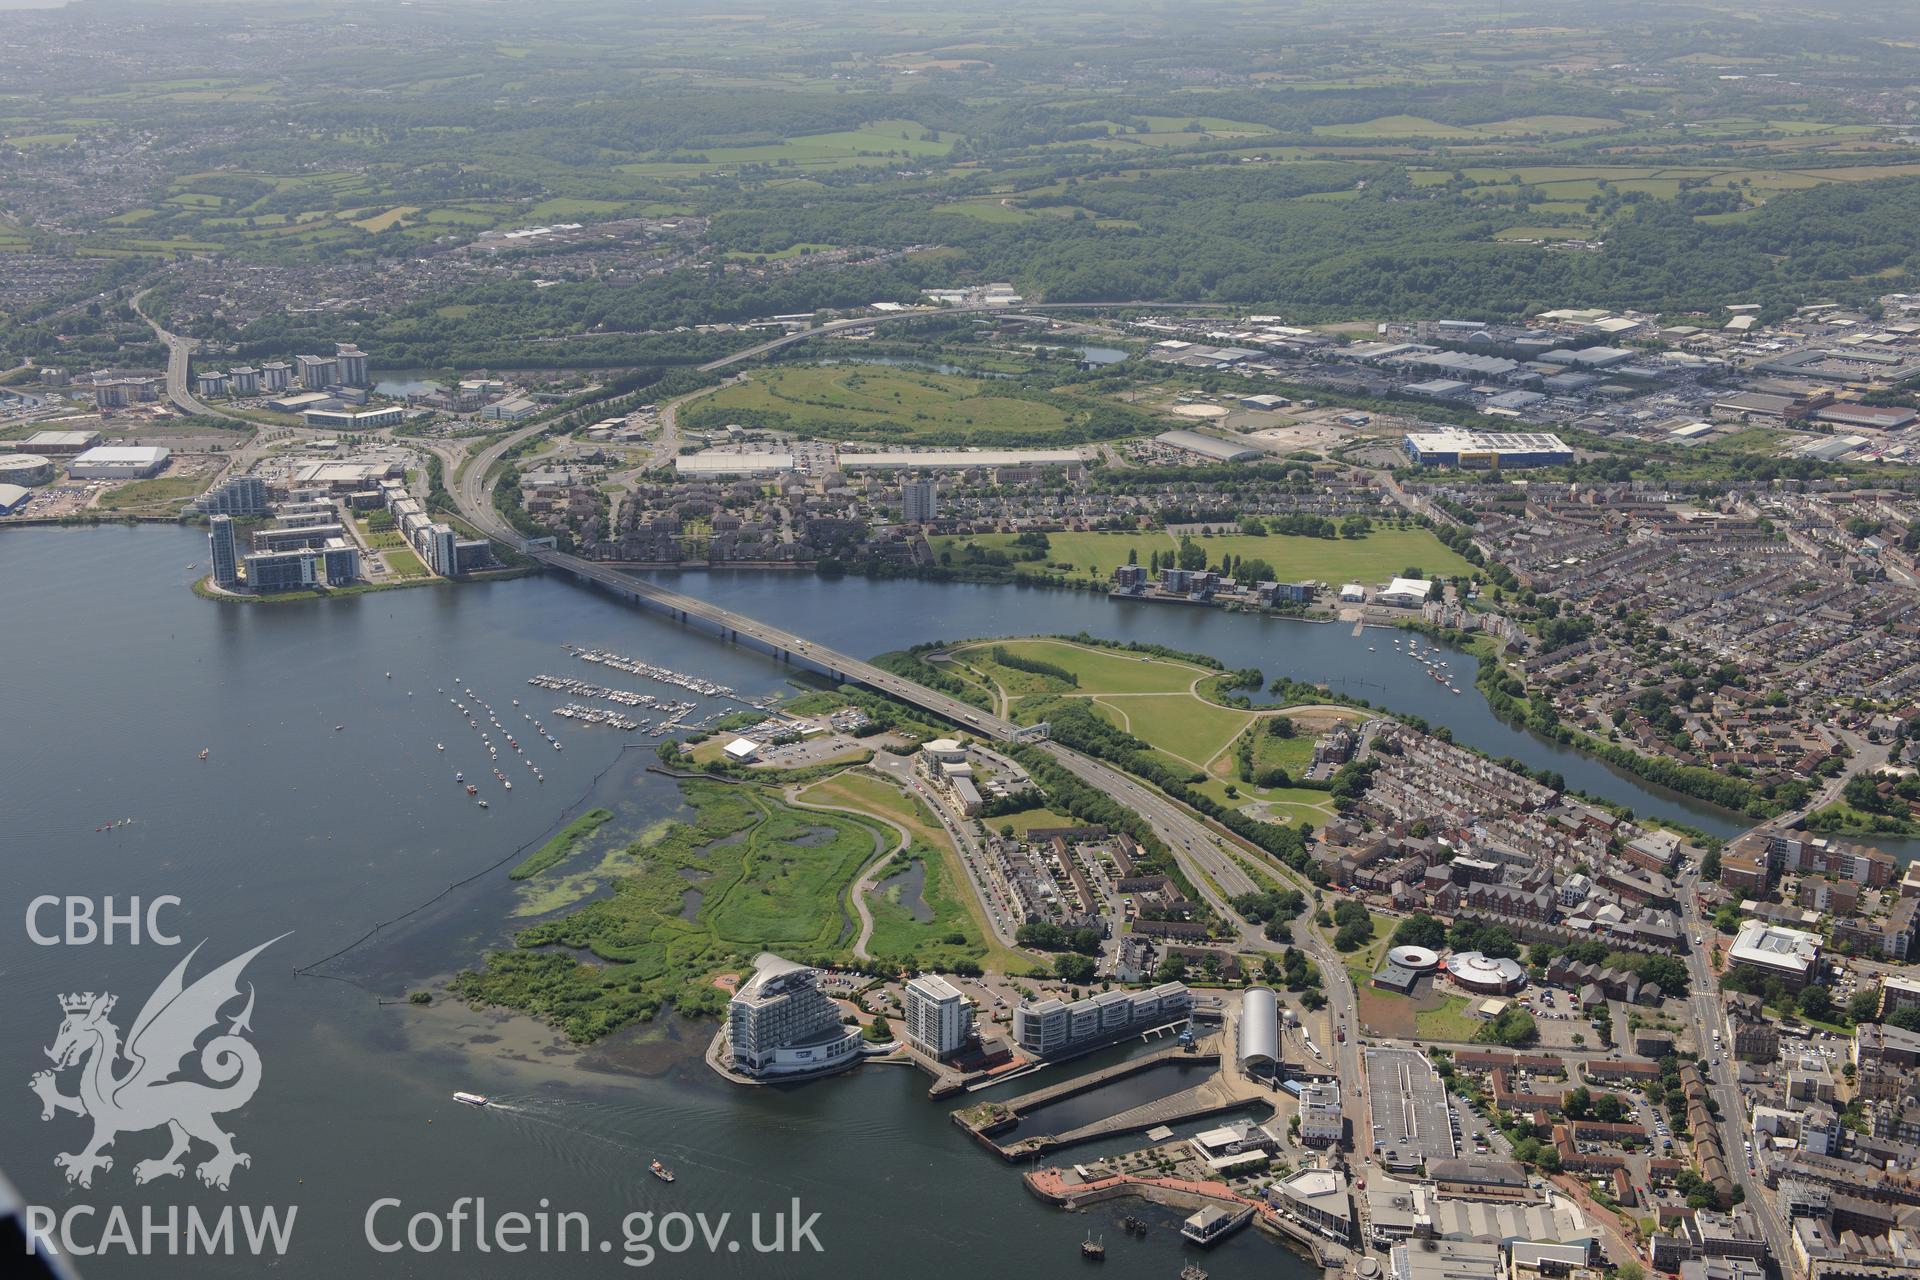 Techniquest; the St. David's Hotel; Hamadryad Park and the Lagoons and Wetlands Nature Reserve, Cardiff Bay. Oblique aerial photograph taken during the Royal Commission's programme of archaeological aerial reconnaissance by Toby Driver on 29th June 2015.